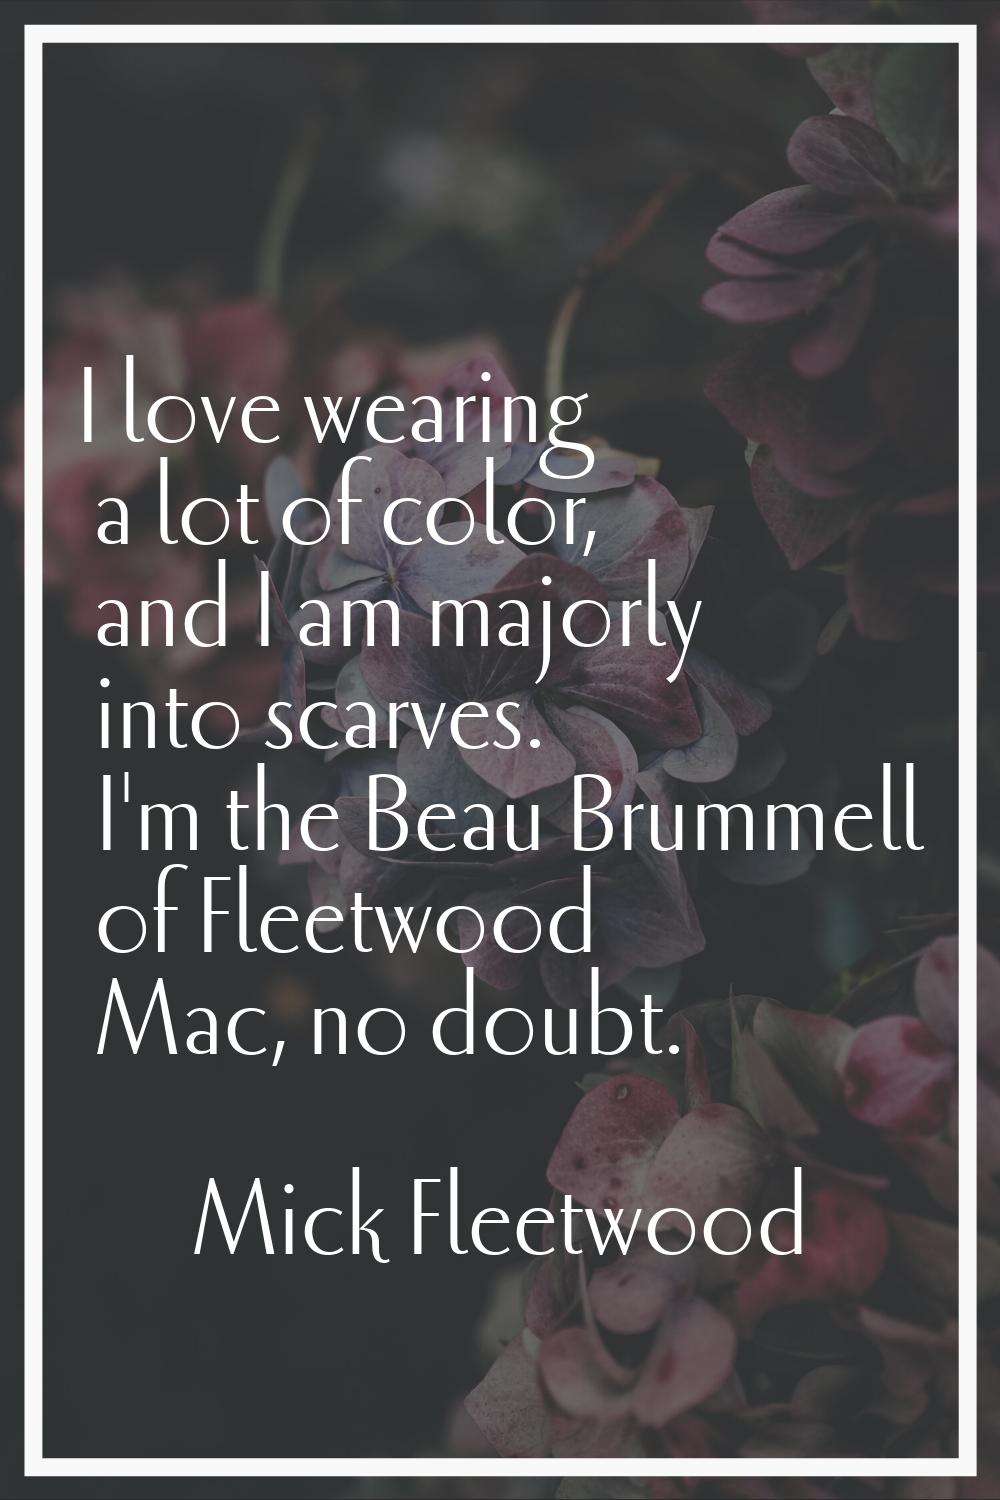 I love wearing a lot of color, and I am majorly into scarves. I'm the Beau Brummell of Fleetwood Ma